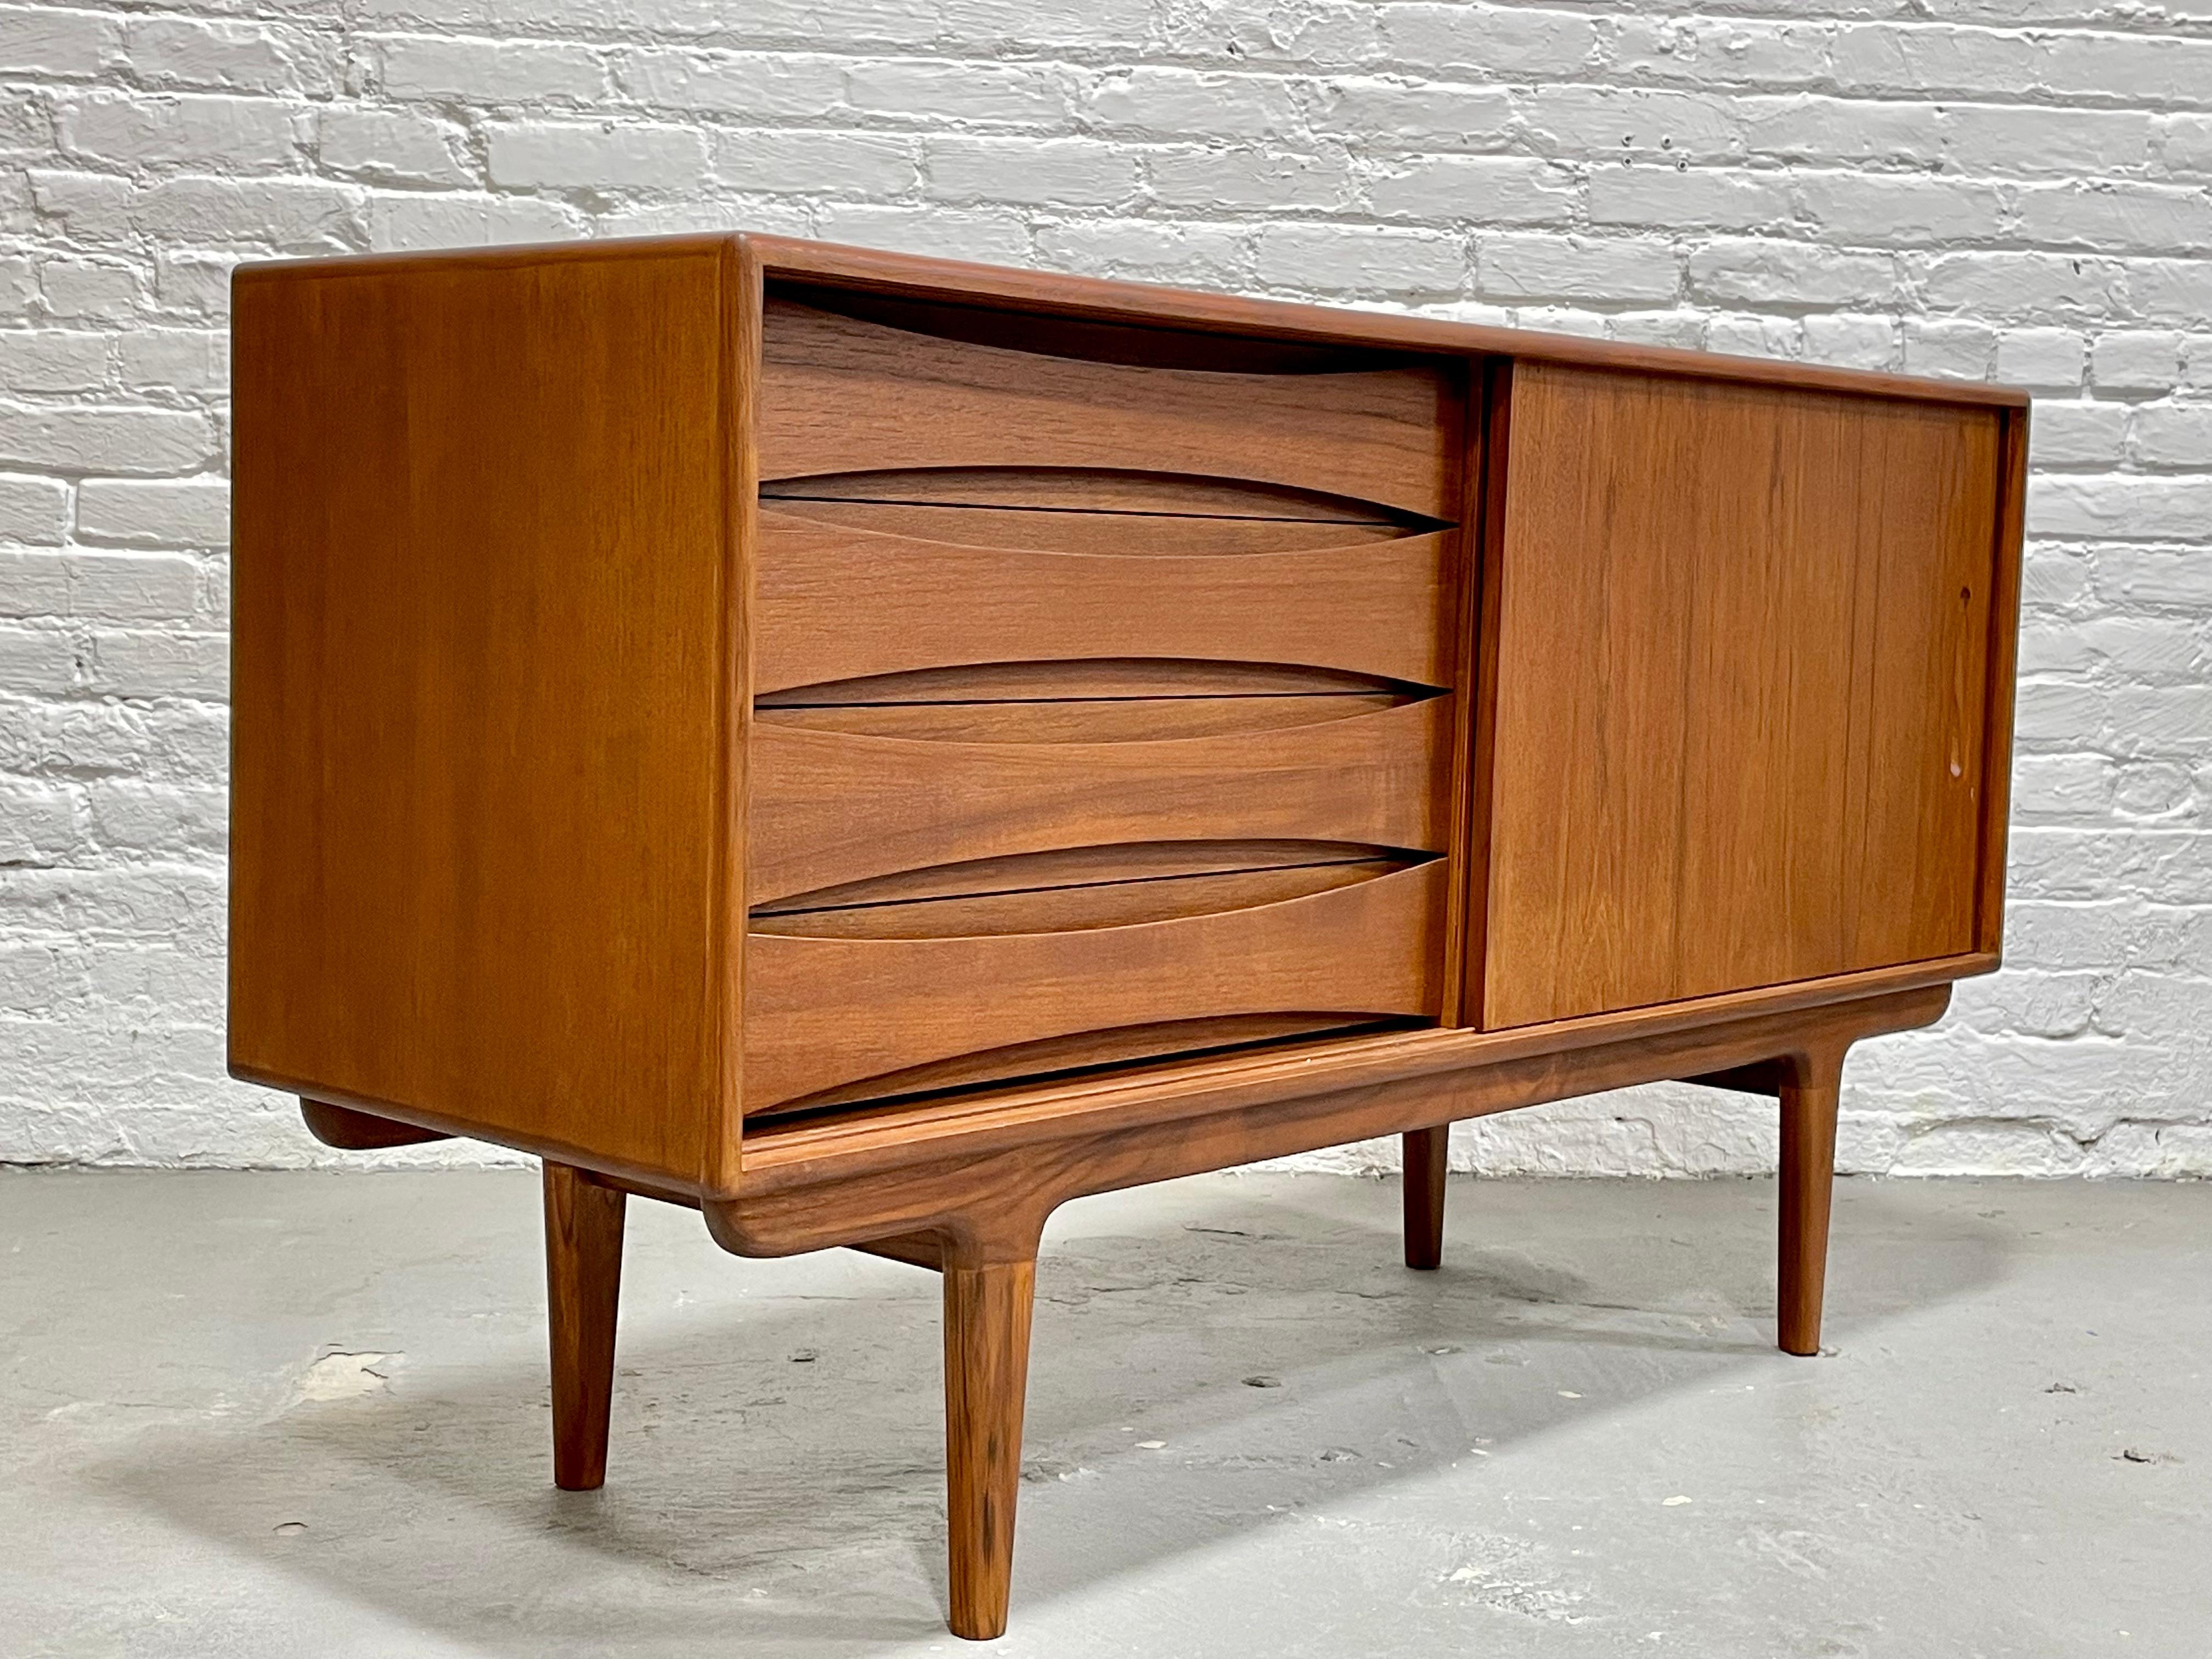 Apartment Sized Mid-Century Modern Styled Teak Credenza / Media Stand In New Condition For Sale In Weehawken, NJ